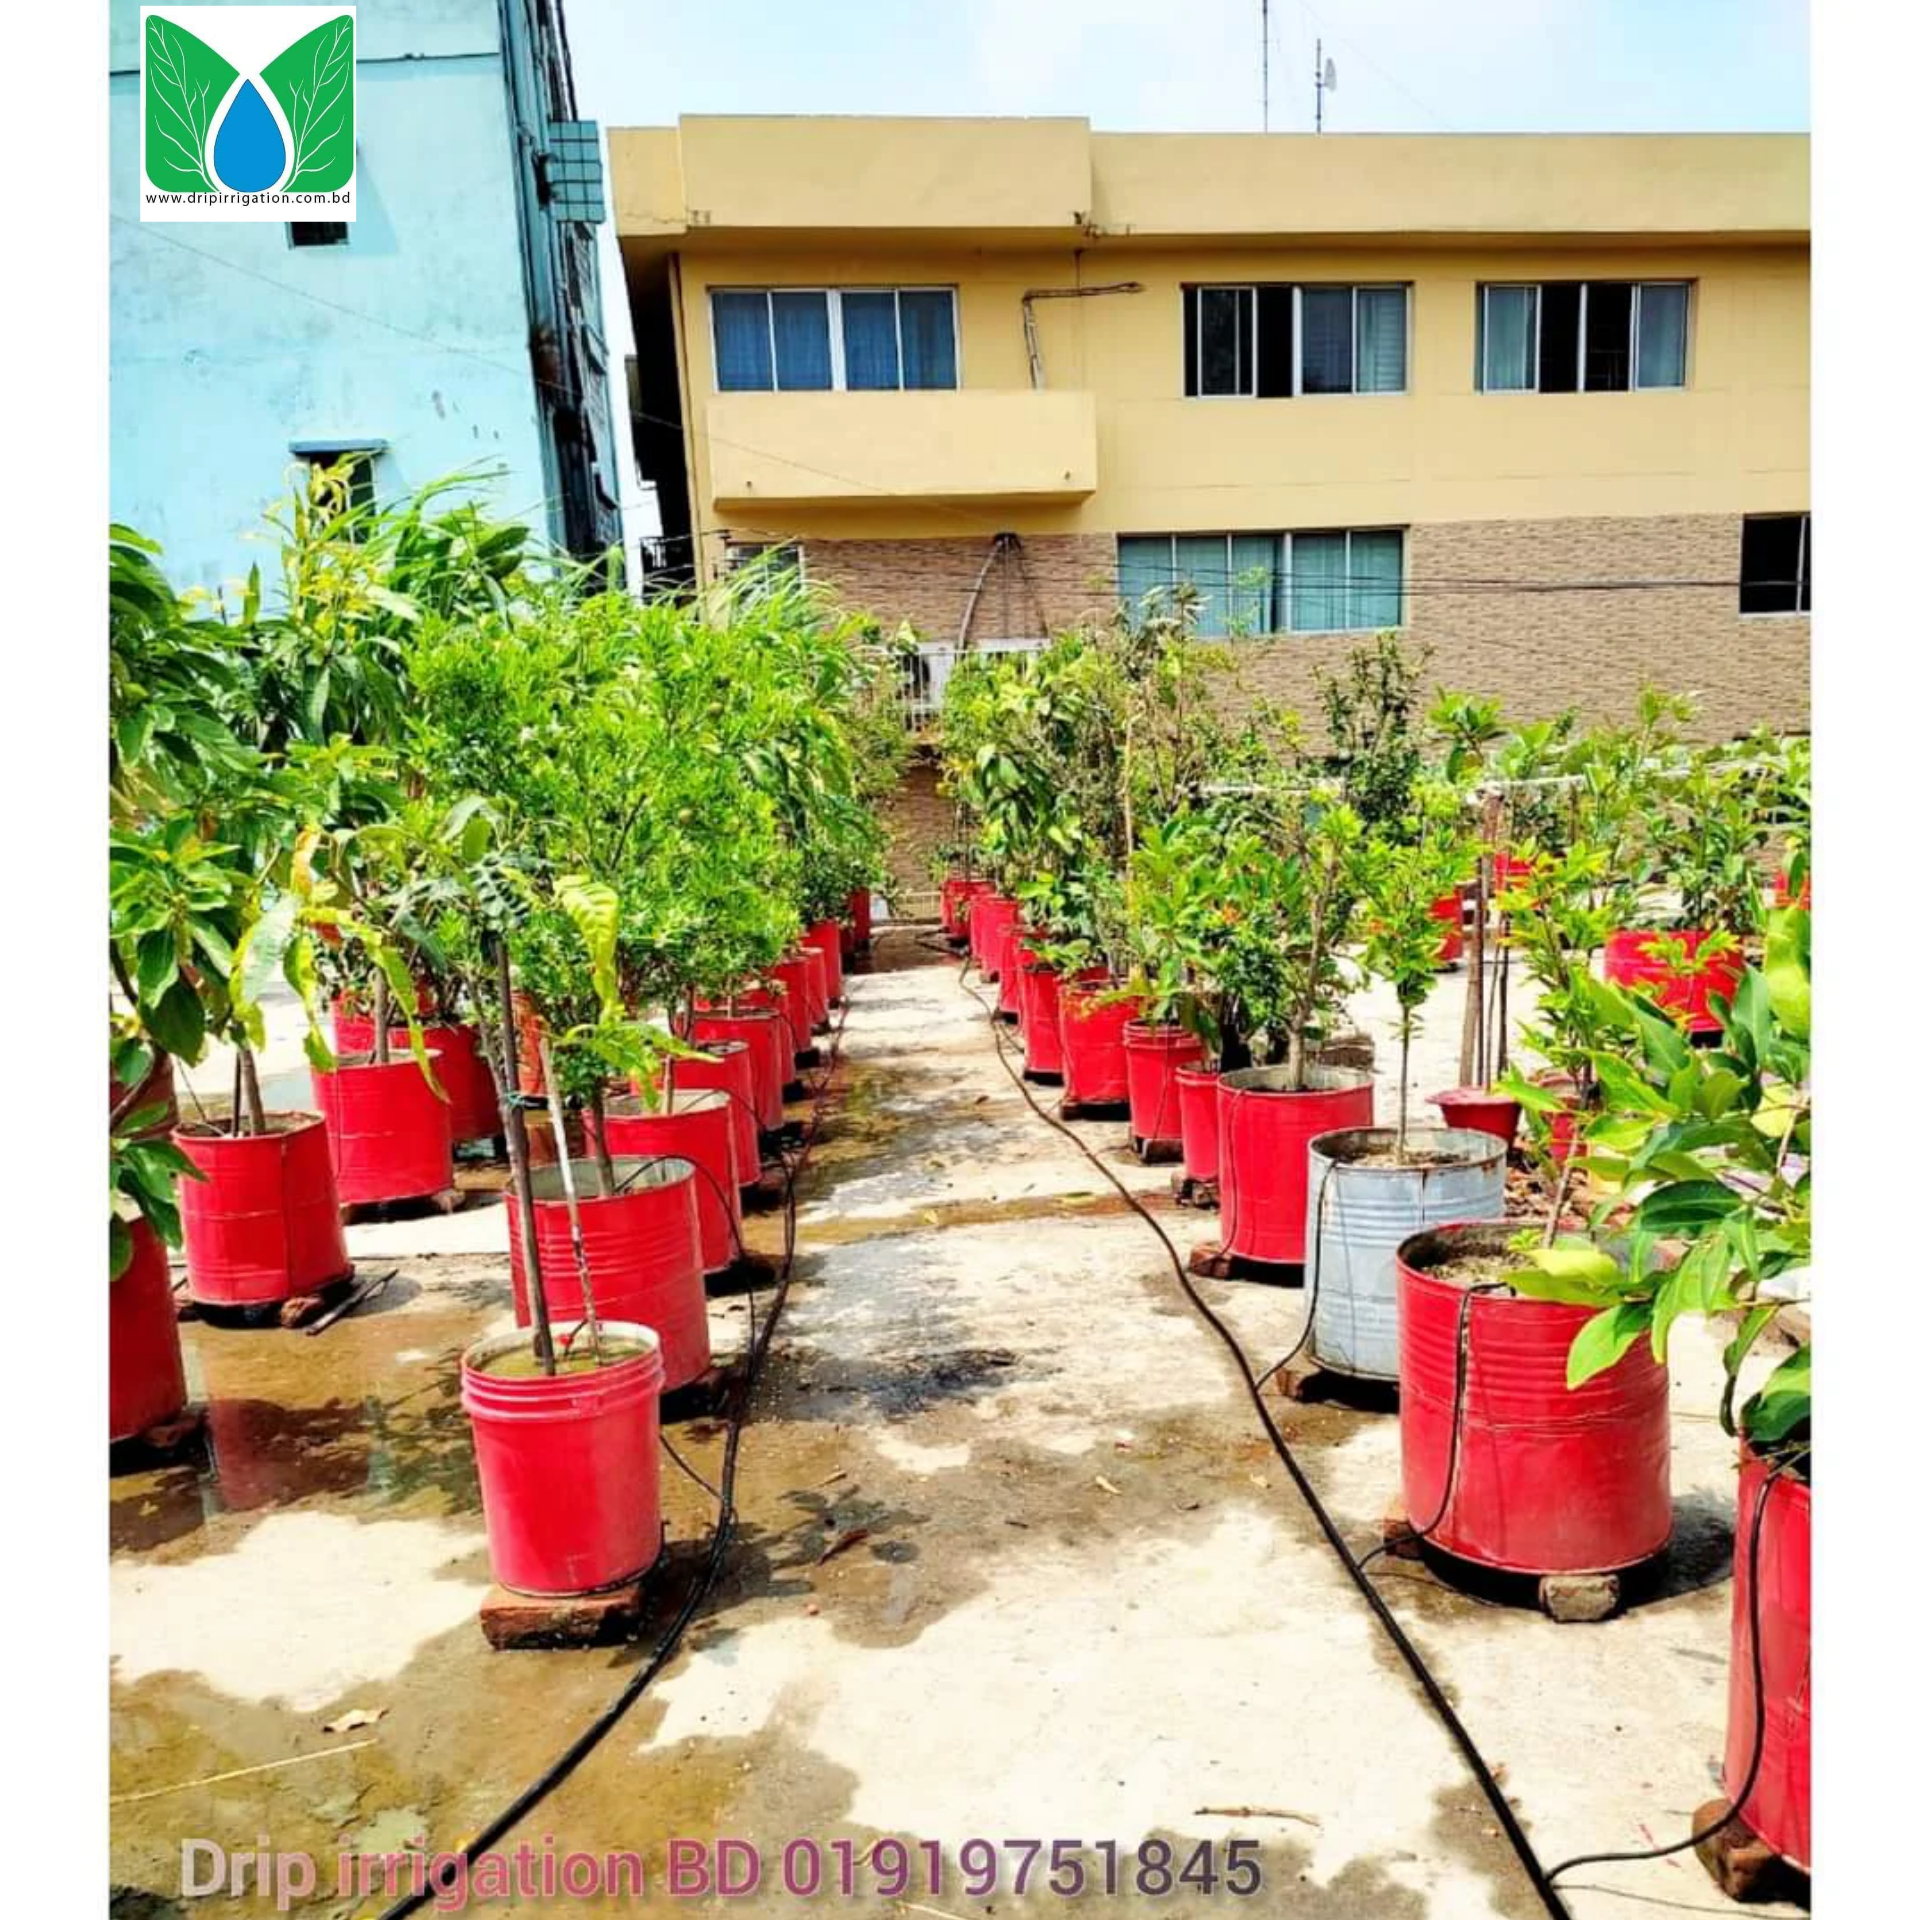 Drip Irrigation package